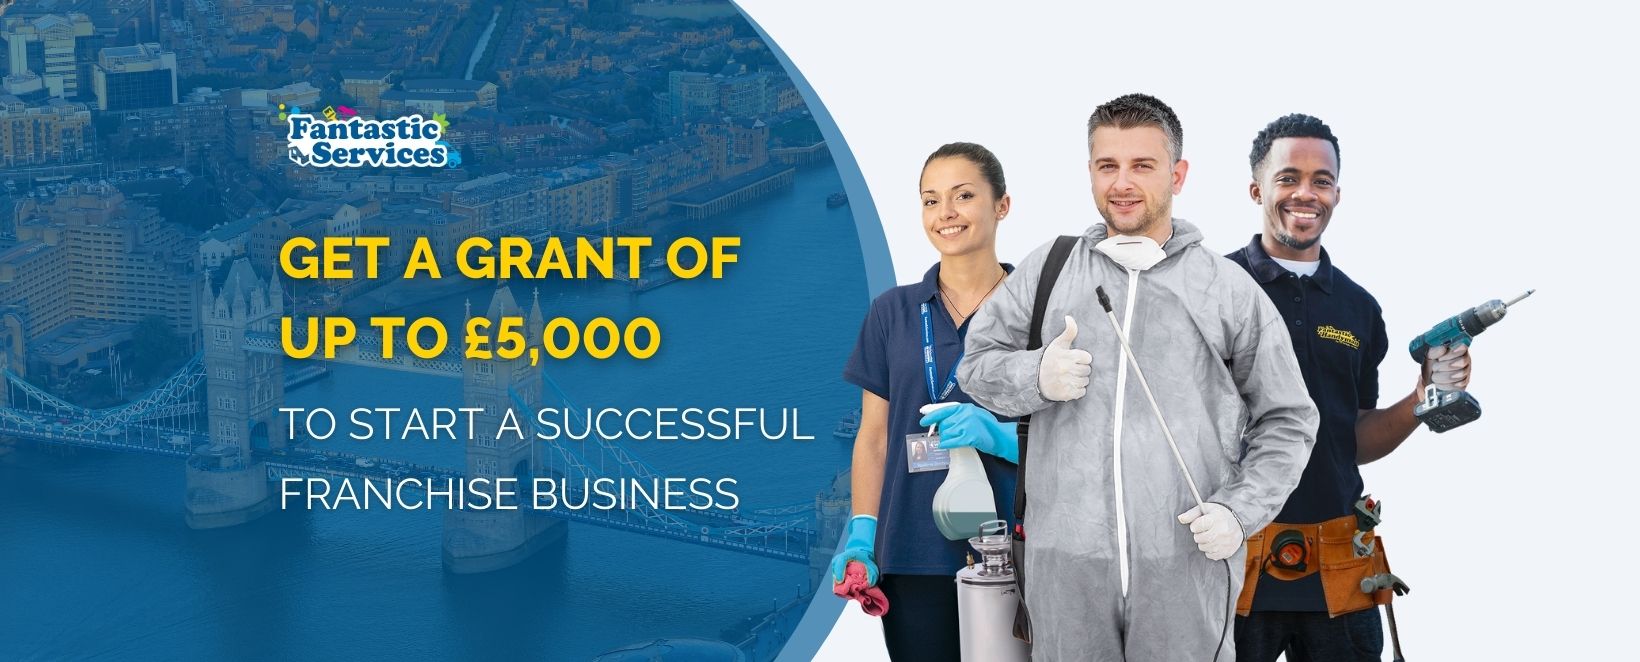 A grant of up to £5,000 is now available to start a franchise business with Fantastic Services